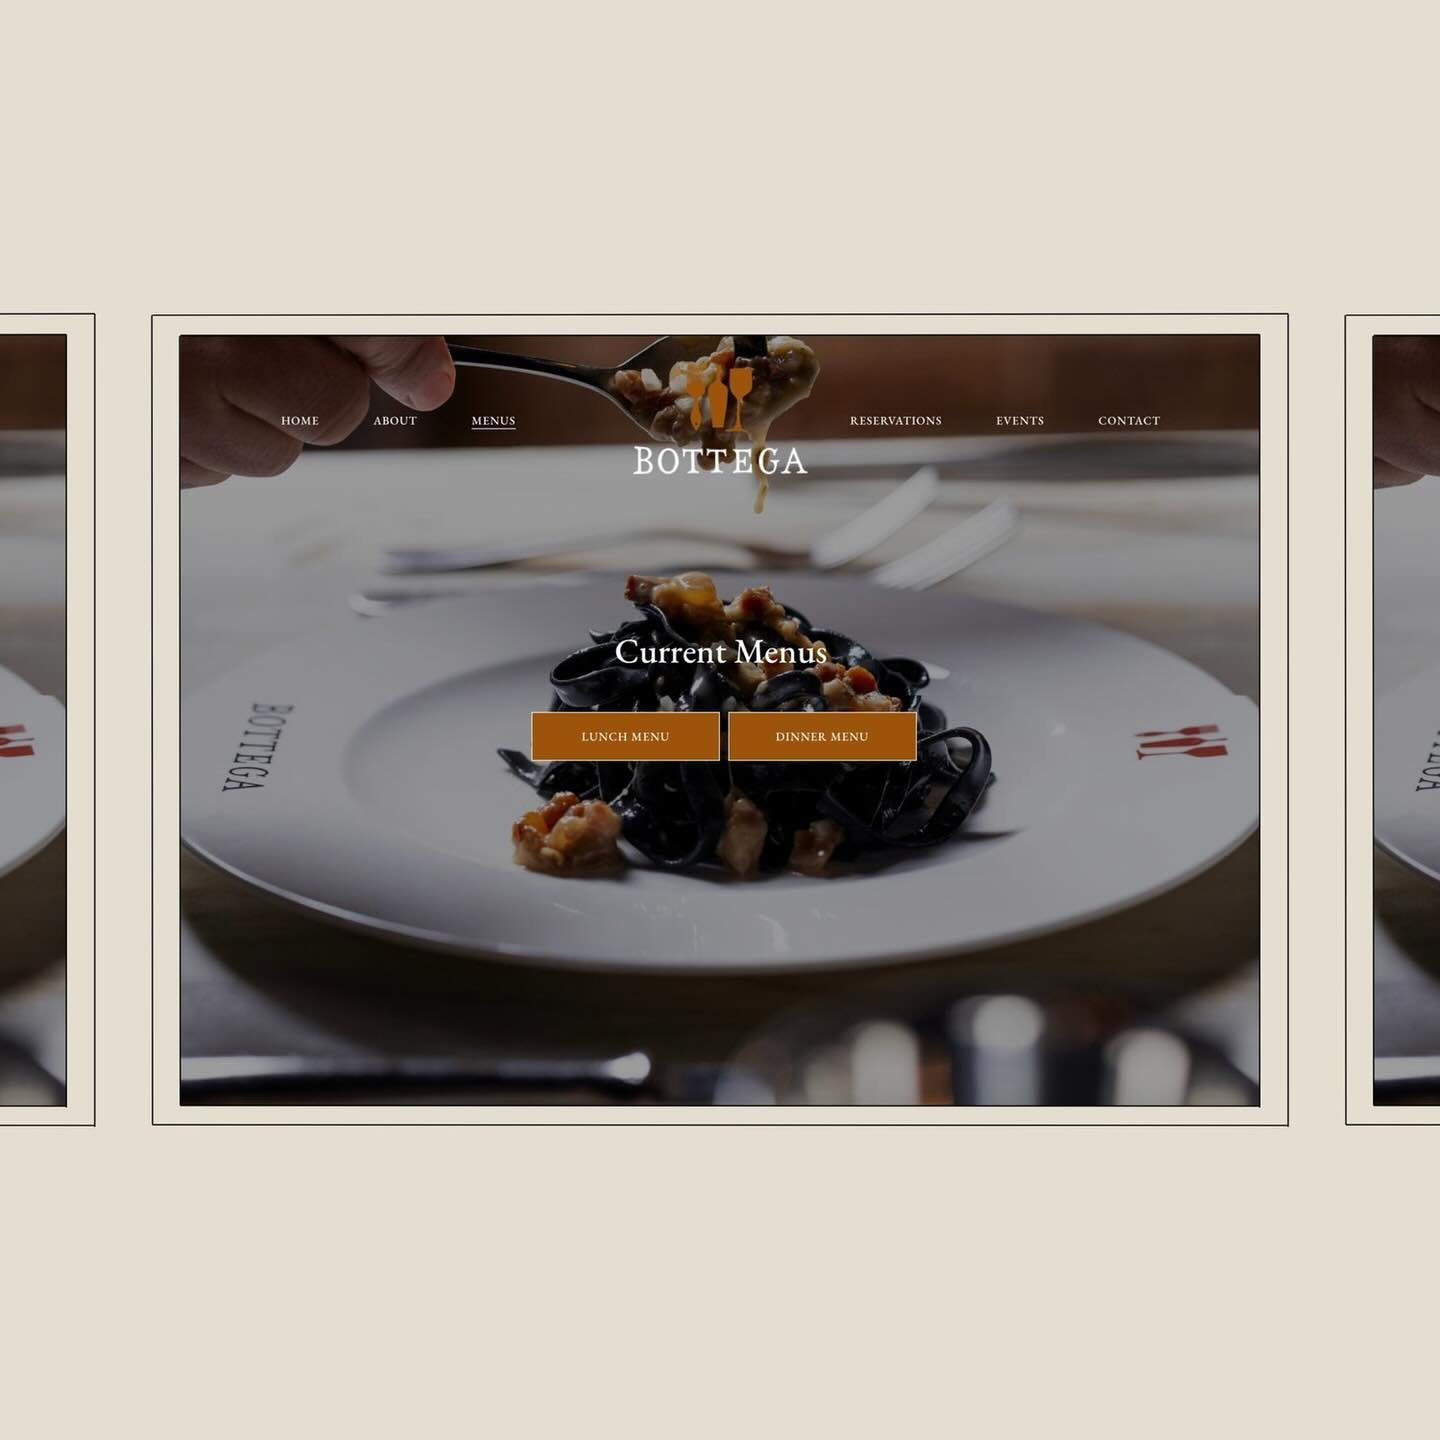 The pairing of delicious cuisine and a beautiful, functional website... what more could you want!